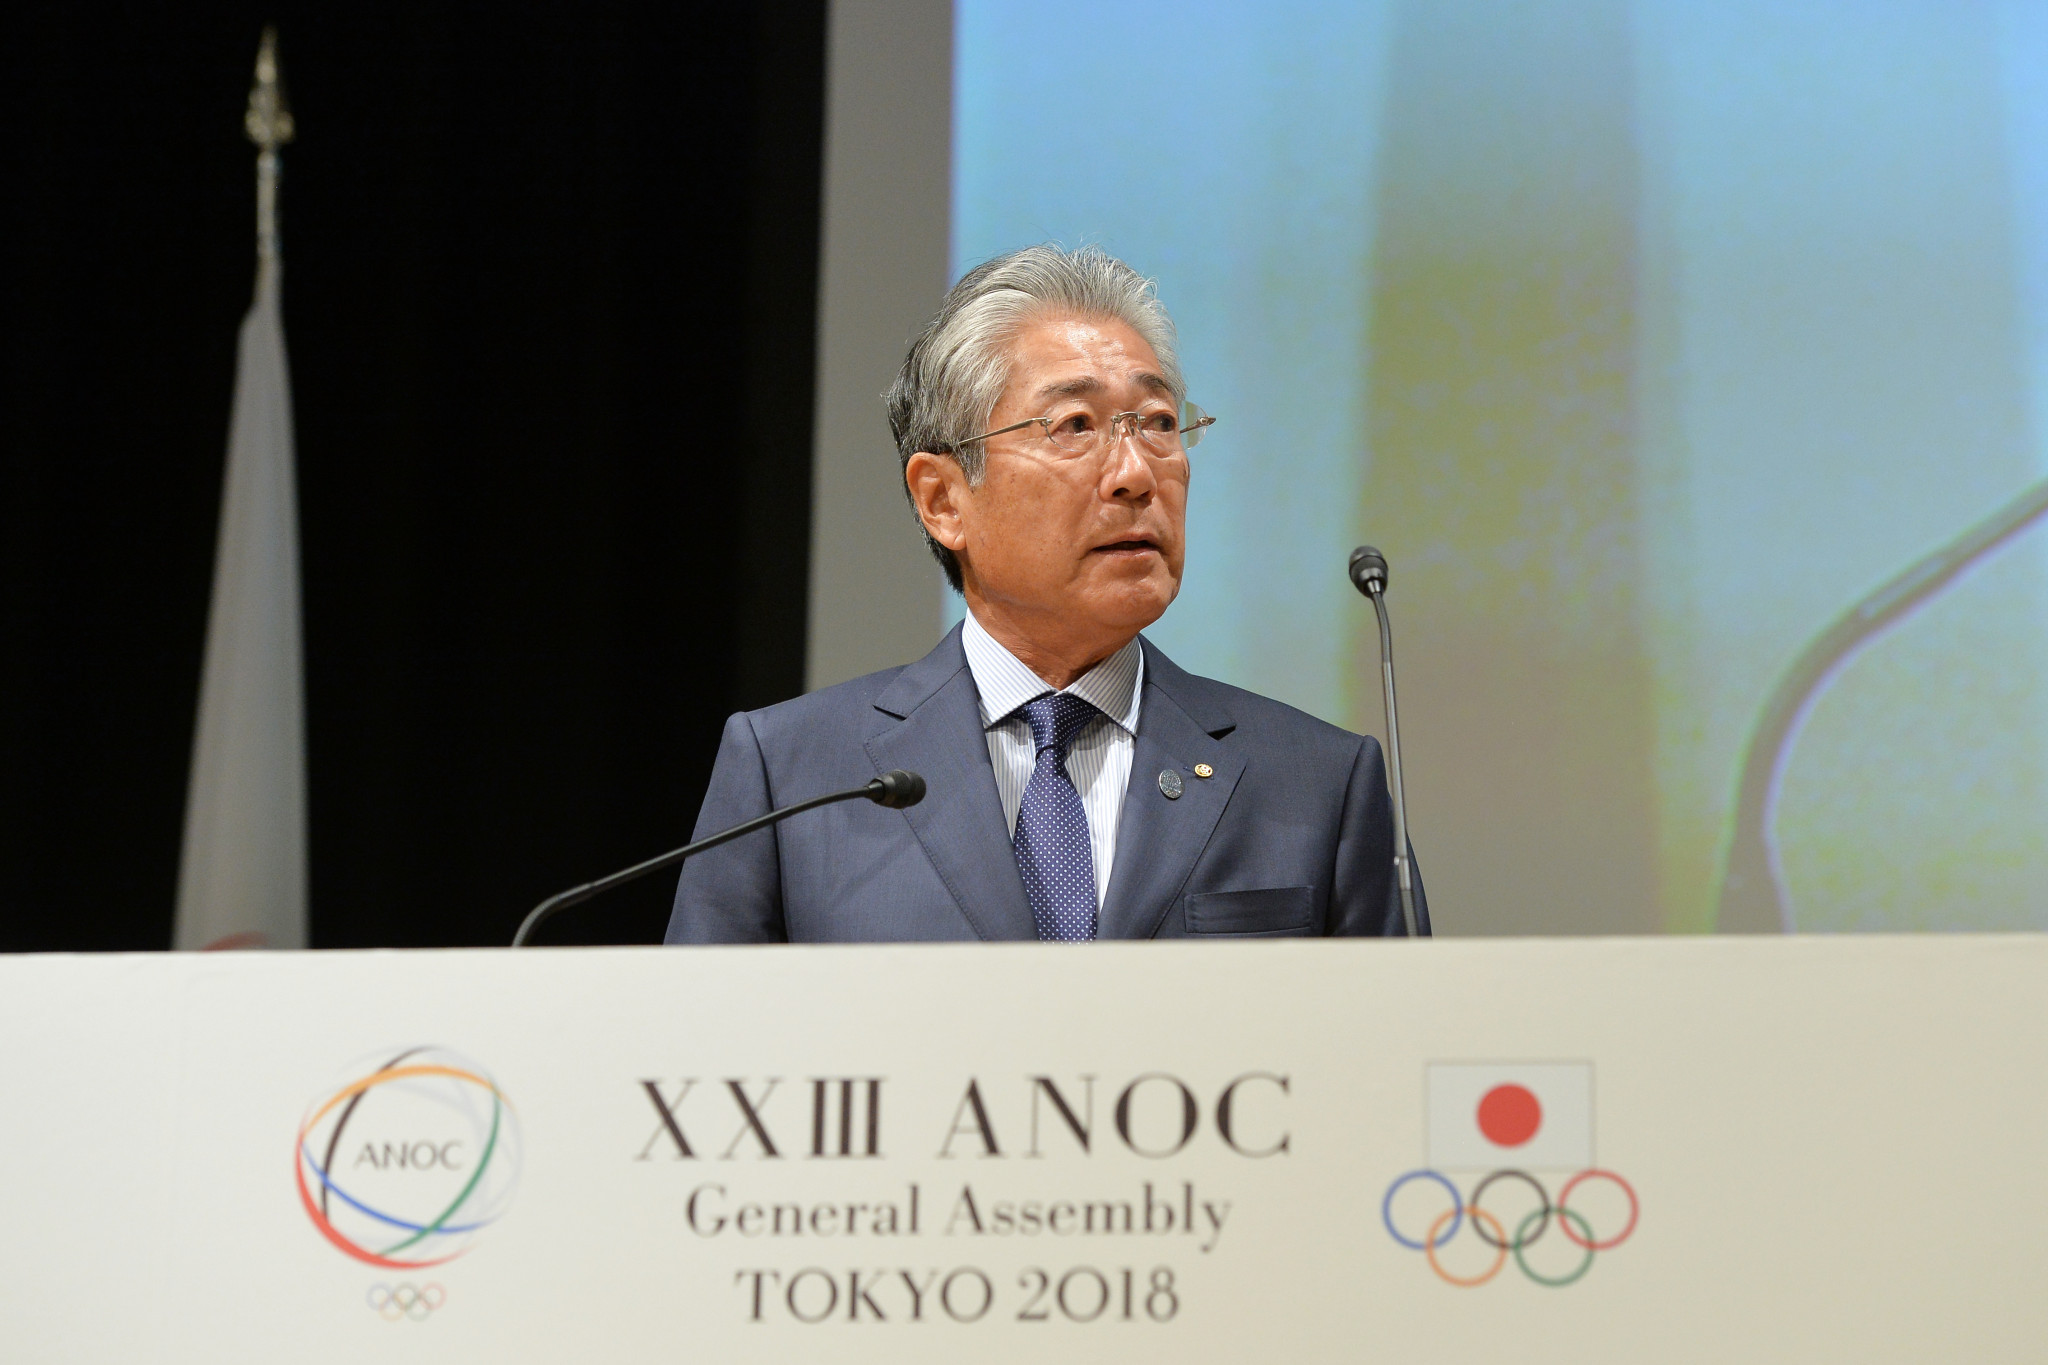 JOC President Tsunekazu Takeda is subject to a formal investigation from French prosecutors ©Getty Images